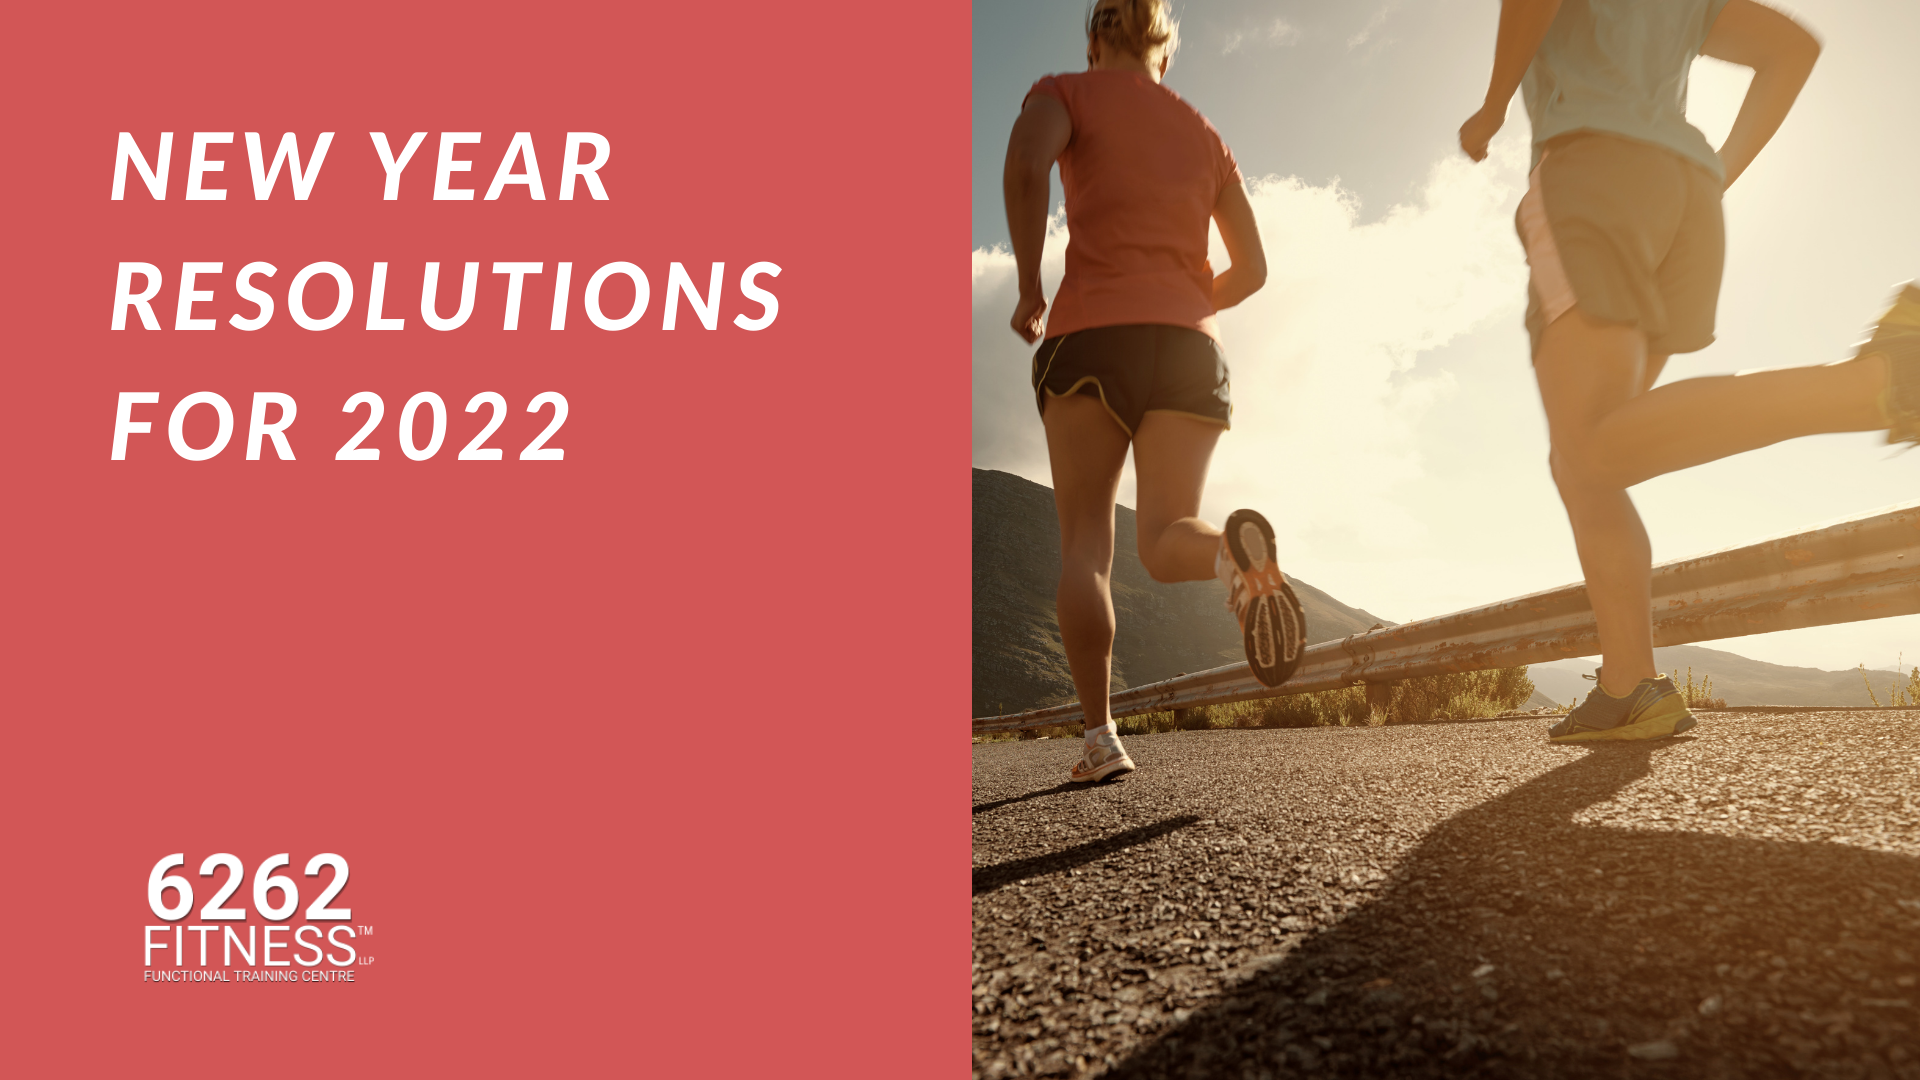 New Year Resolutions For 2022